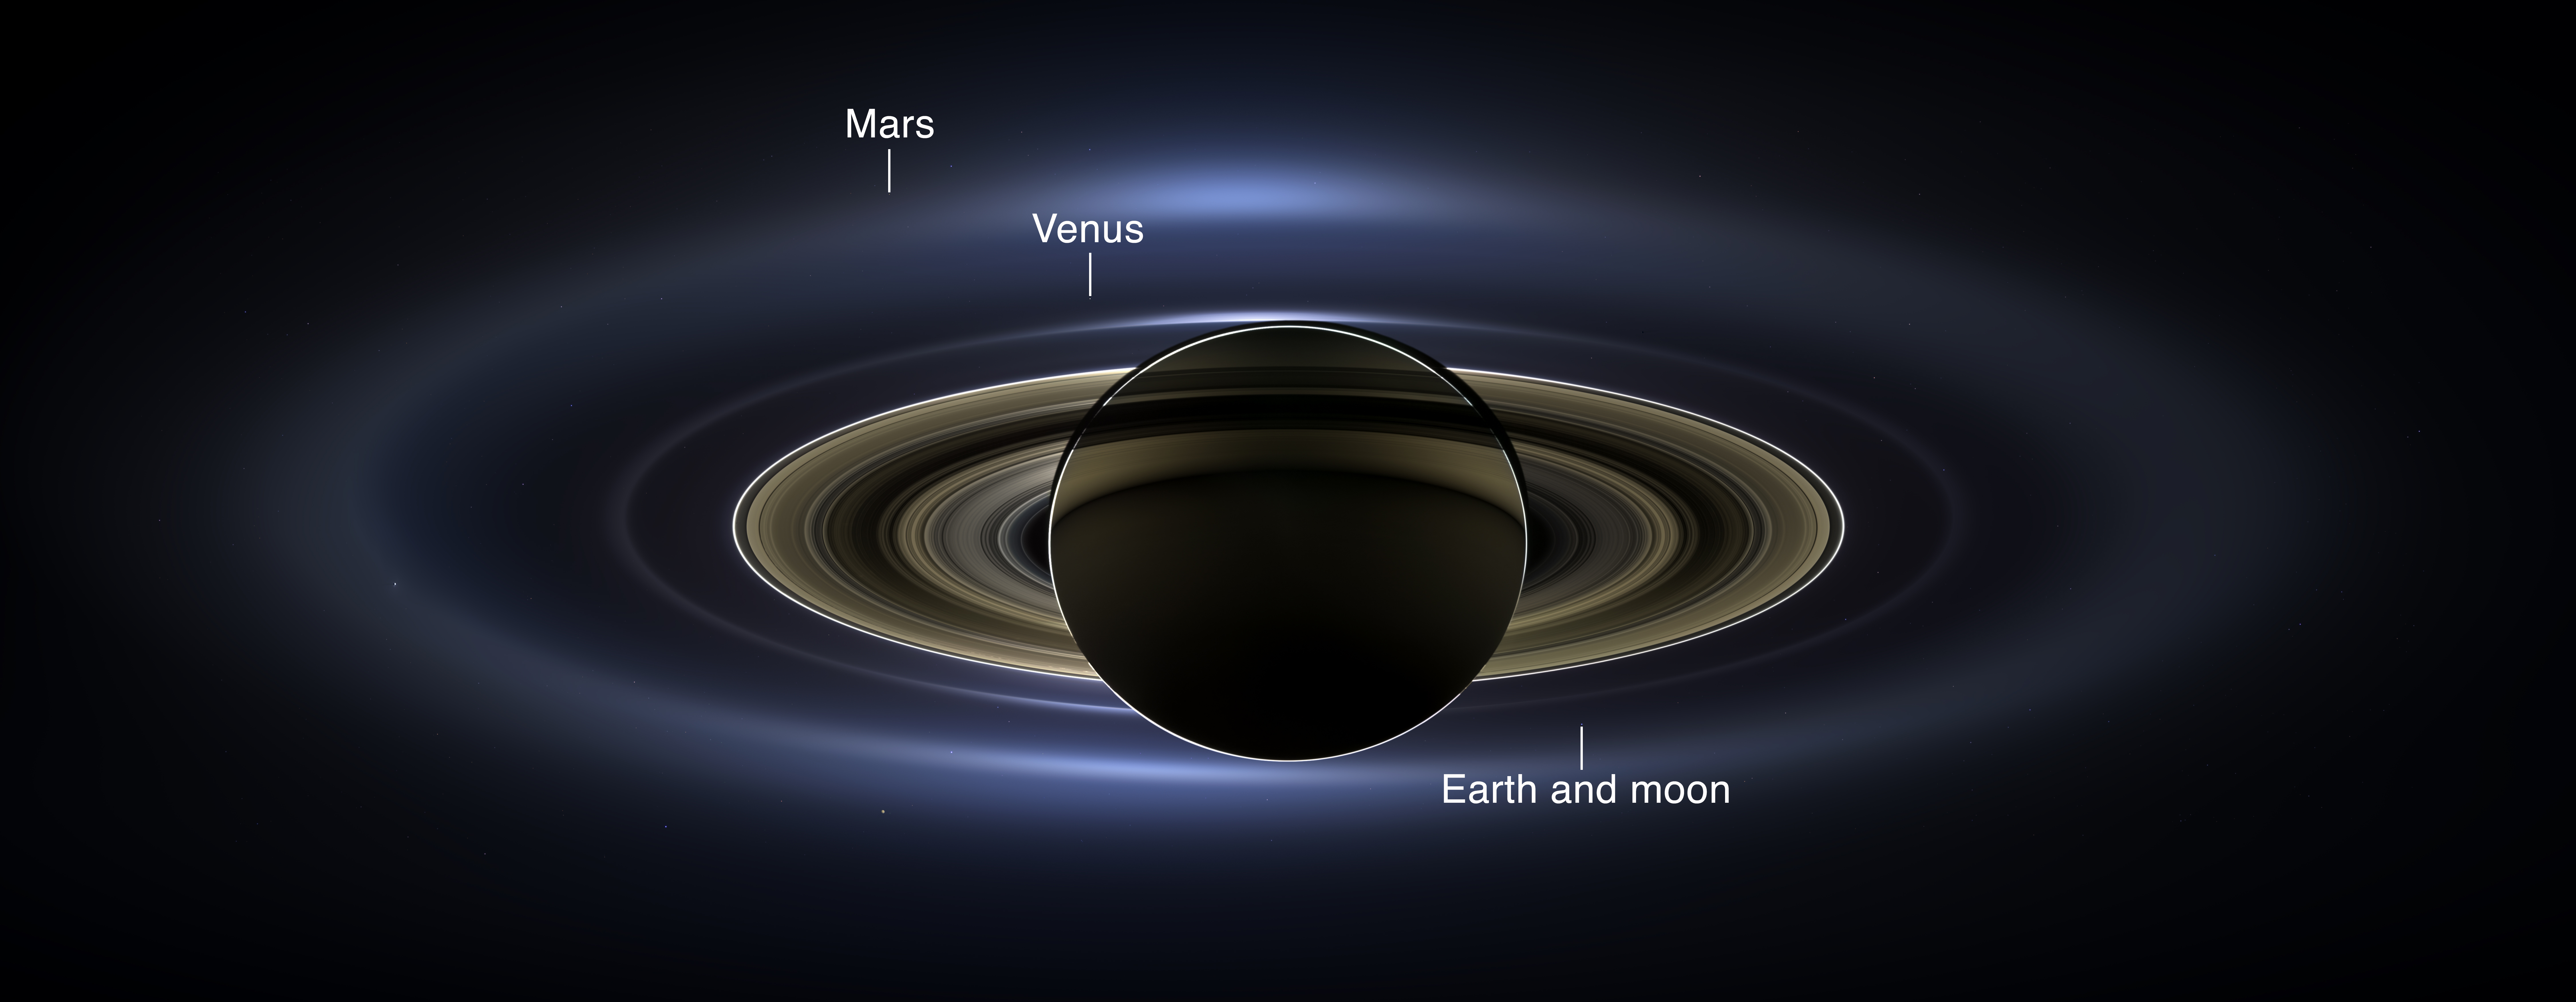 Beautiful backlit view of Saturn with Earth, Moon, Mars and Venus labeled in the background.